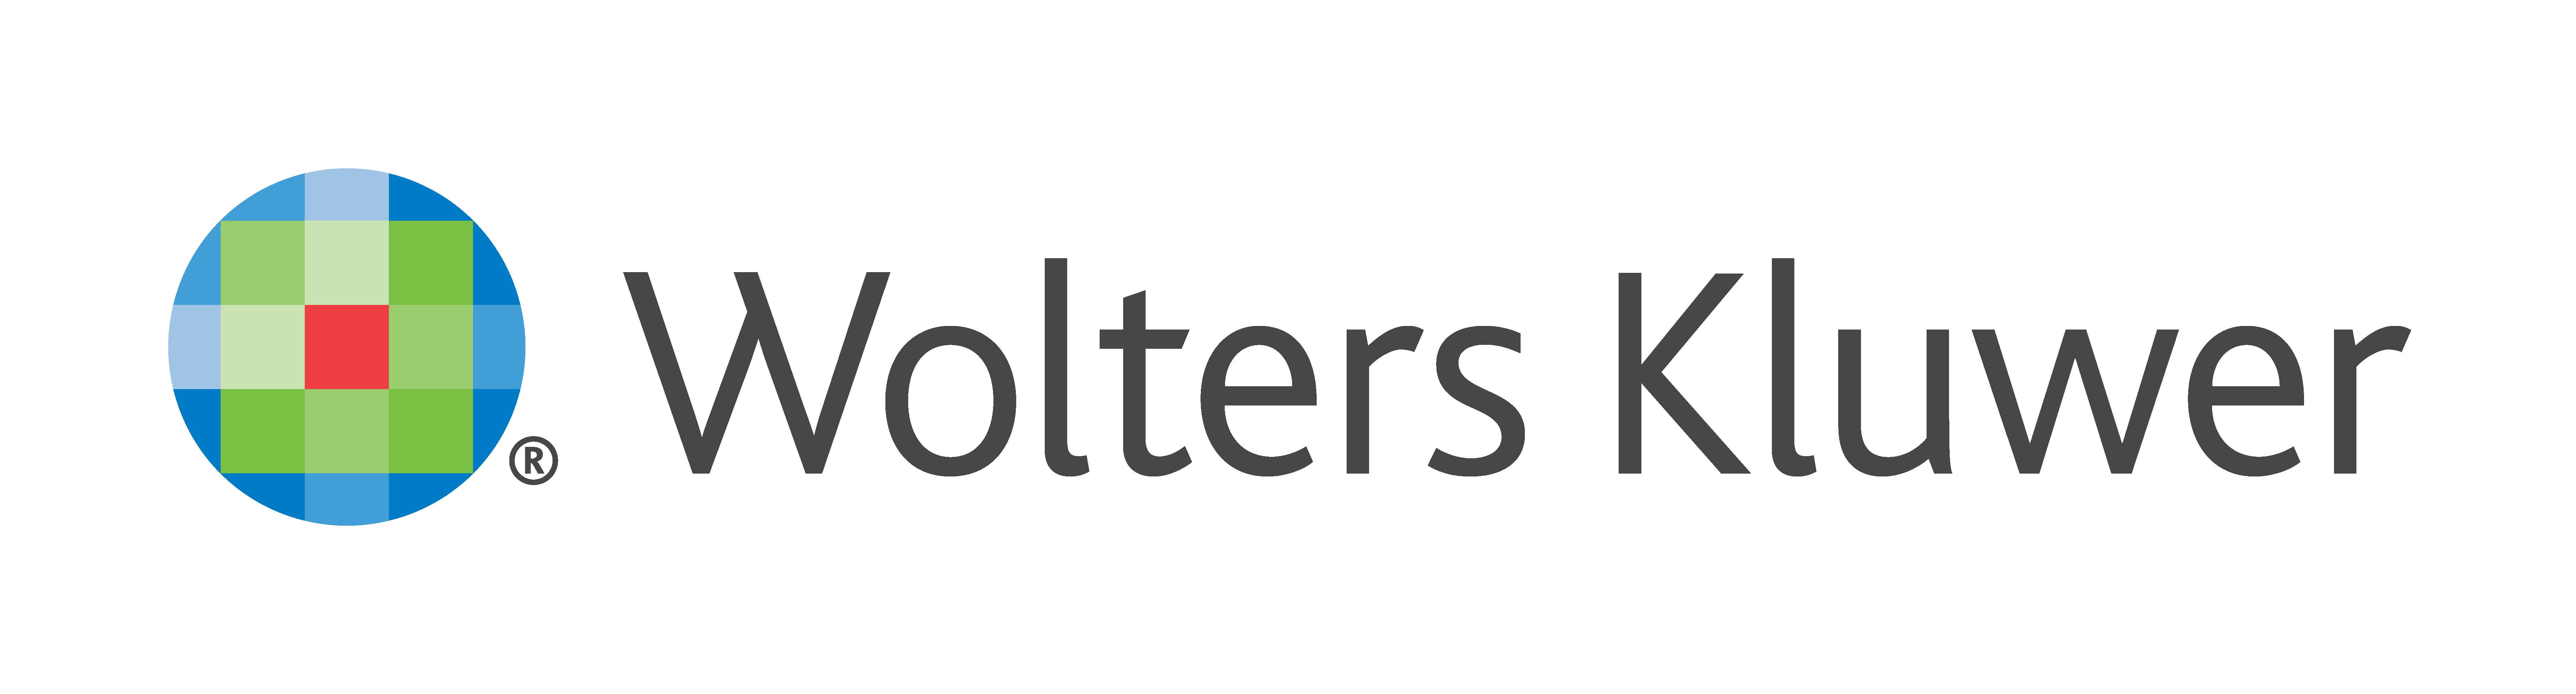 Logo-WoltersKluwer.png